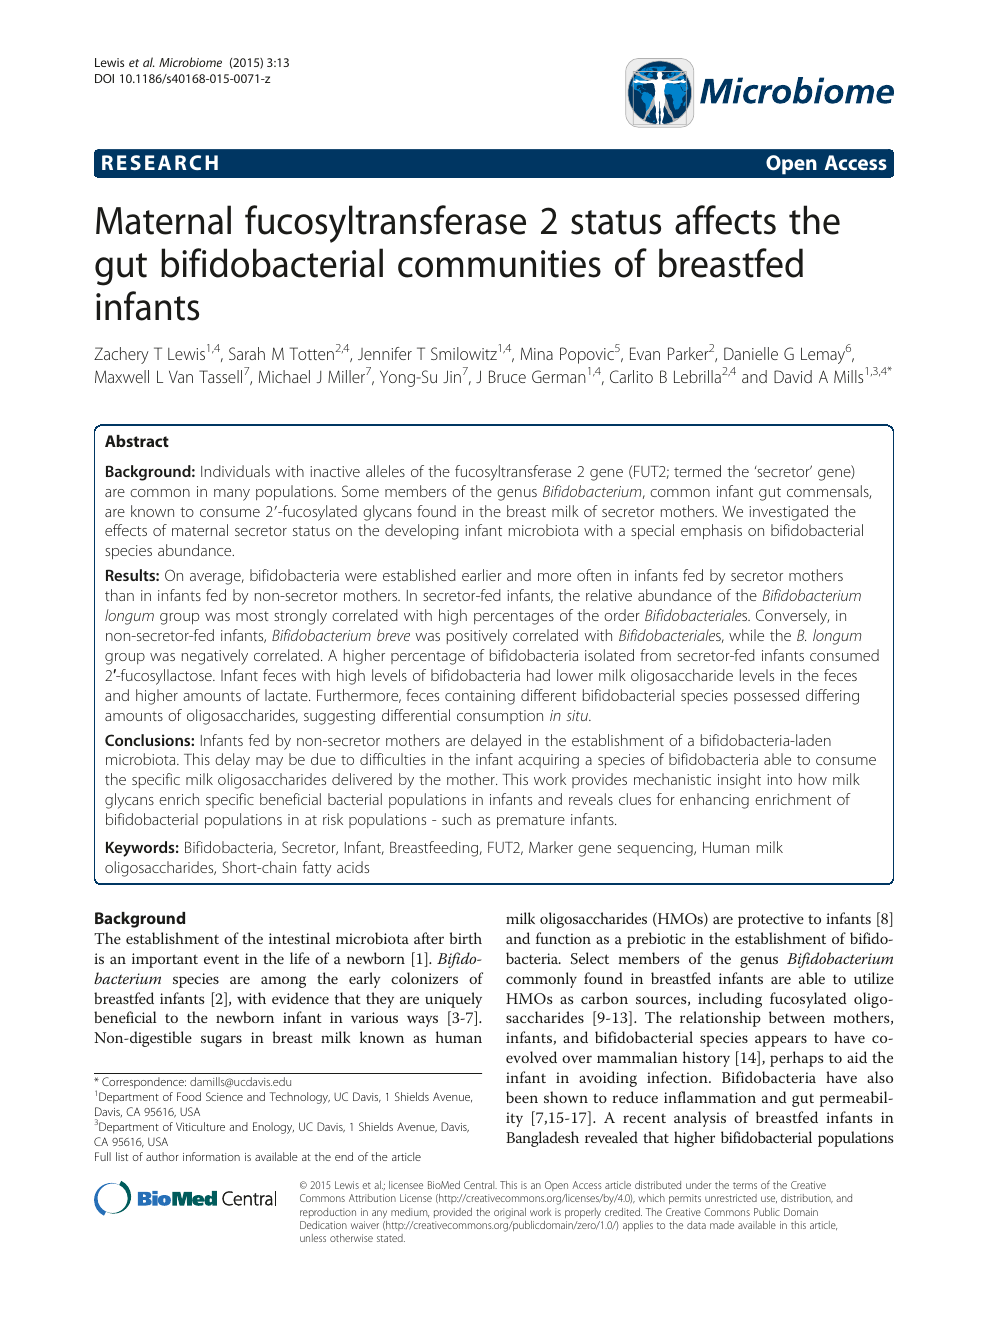 Maternal Fucosyltransferase 2 Status Affects The Gut Bifidobacterial Communities Of Breastfed Infants Topic Of Research Paper In Biological Sciences Download Scholarly Article Pdf And Read For Free On Cyberleninka Open Science Hub